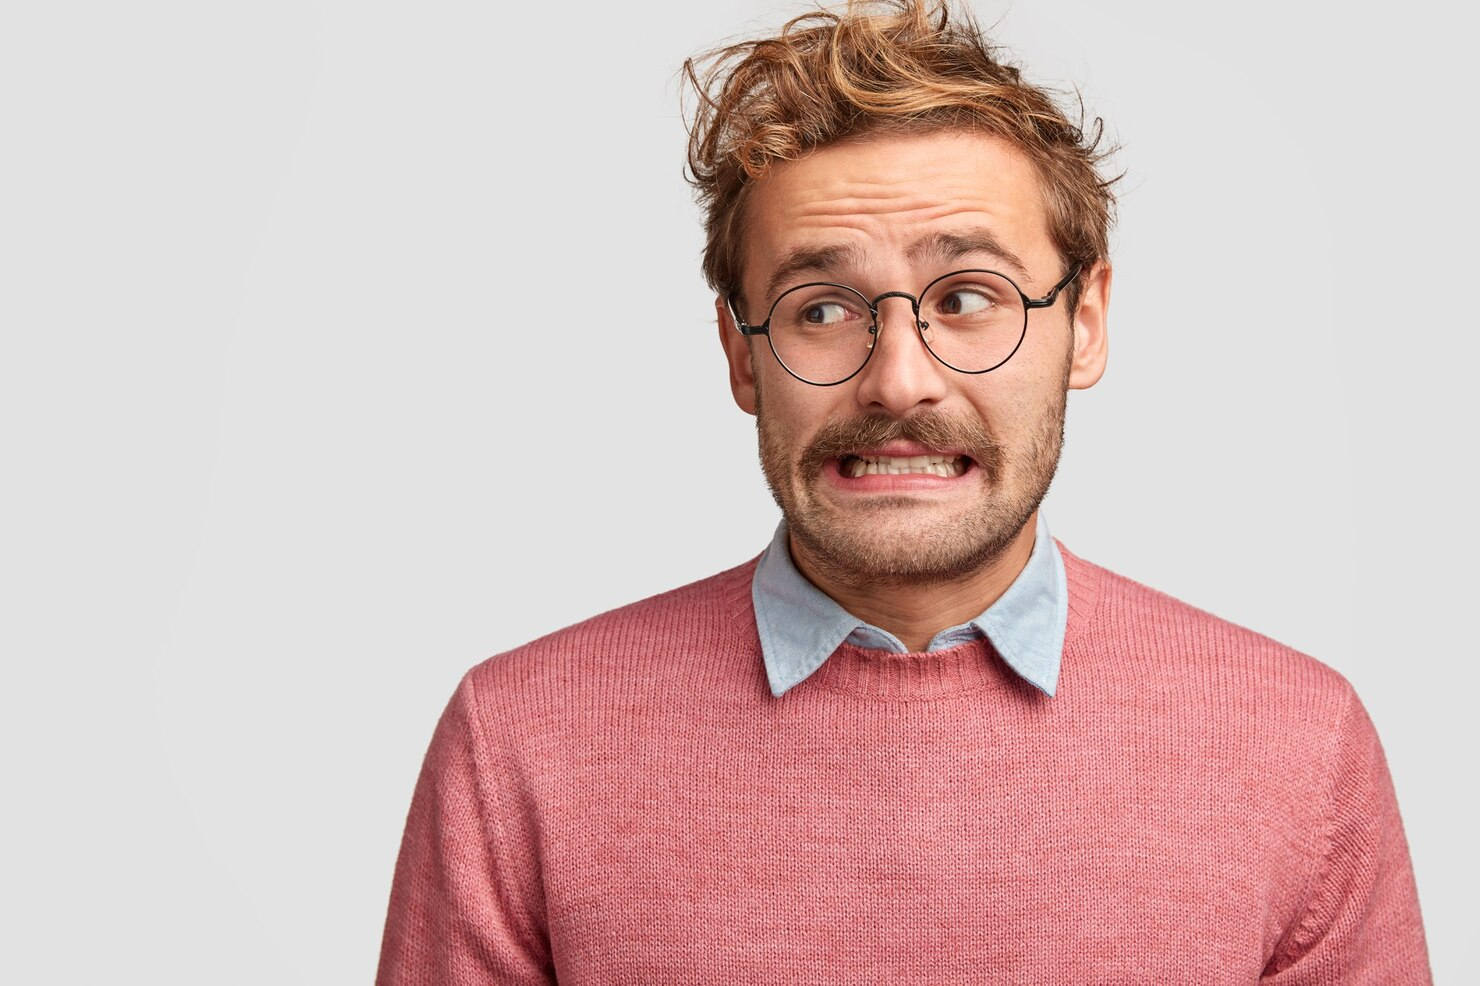 A man in glasses looks away while making silly expressions.